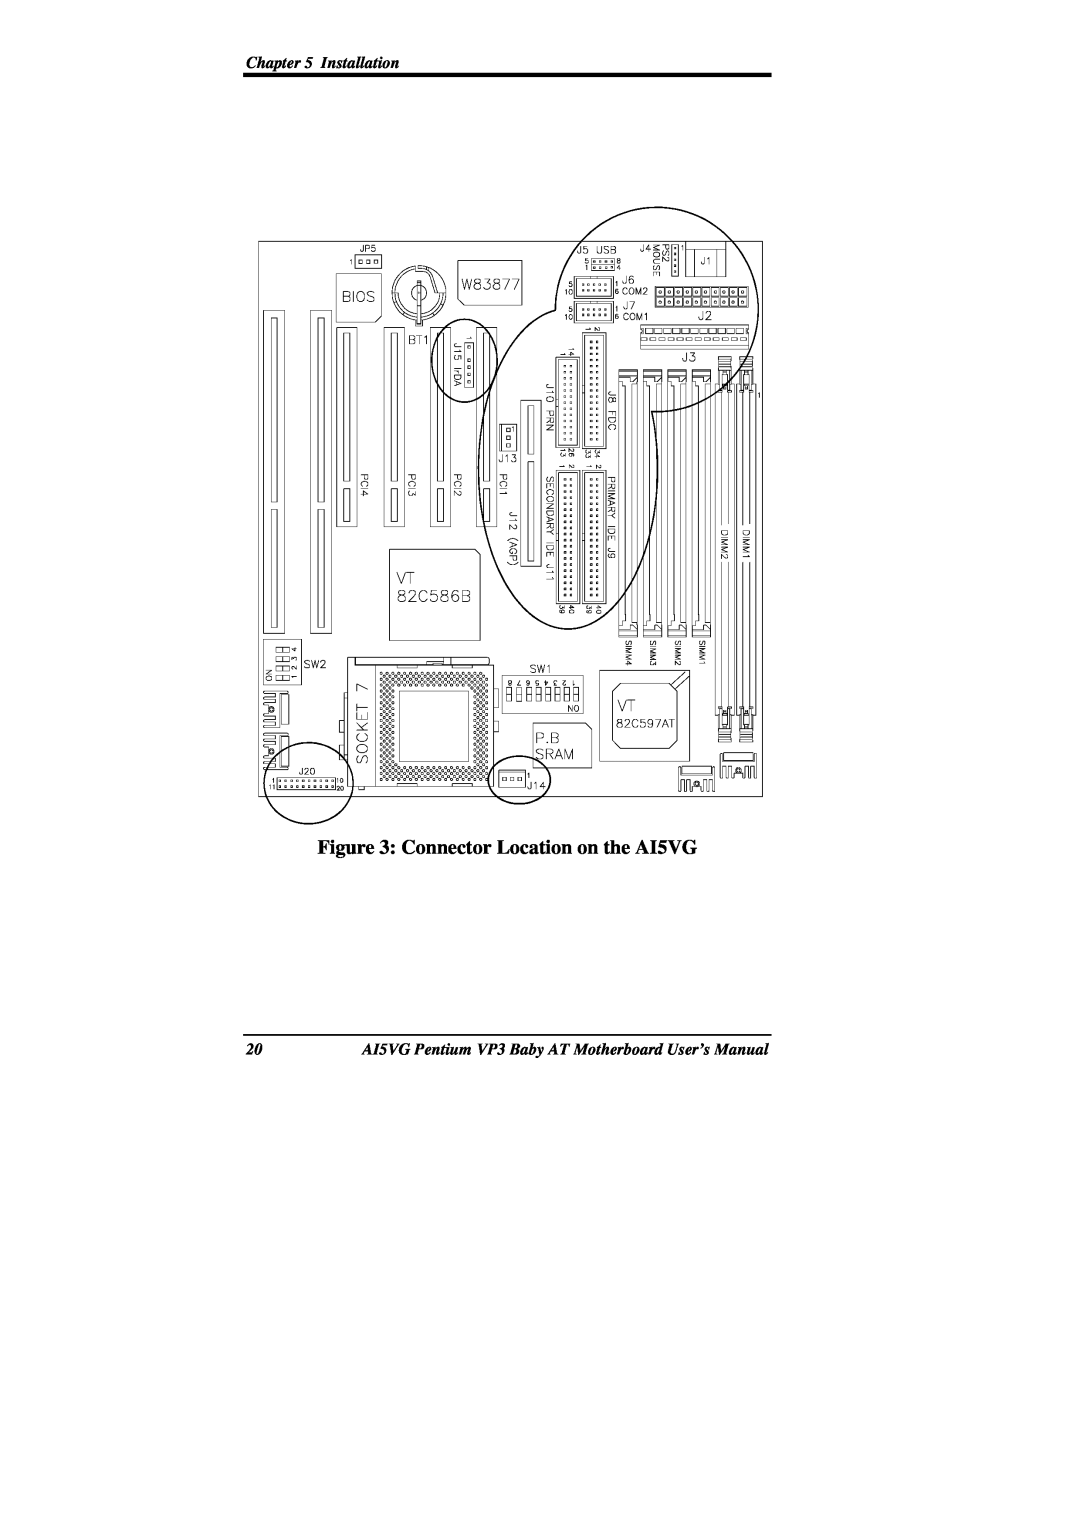 Intel user manual Connector Location on the AI5VG, Installation 